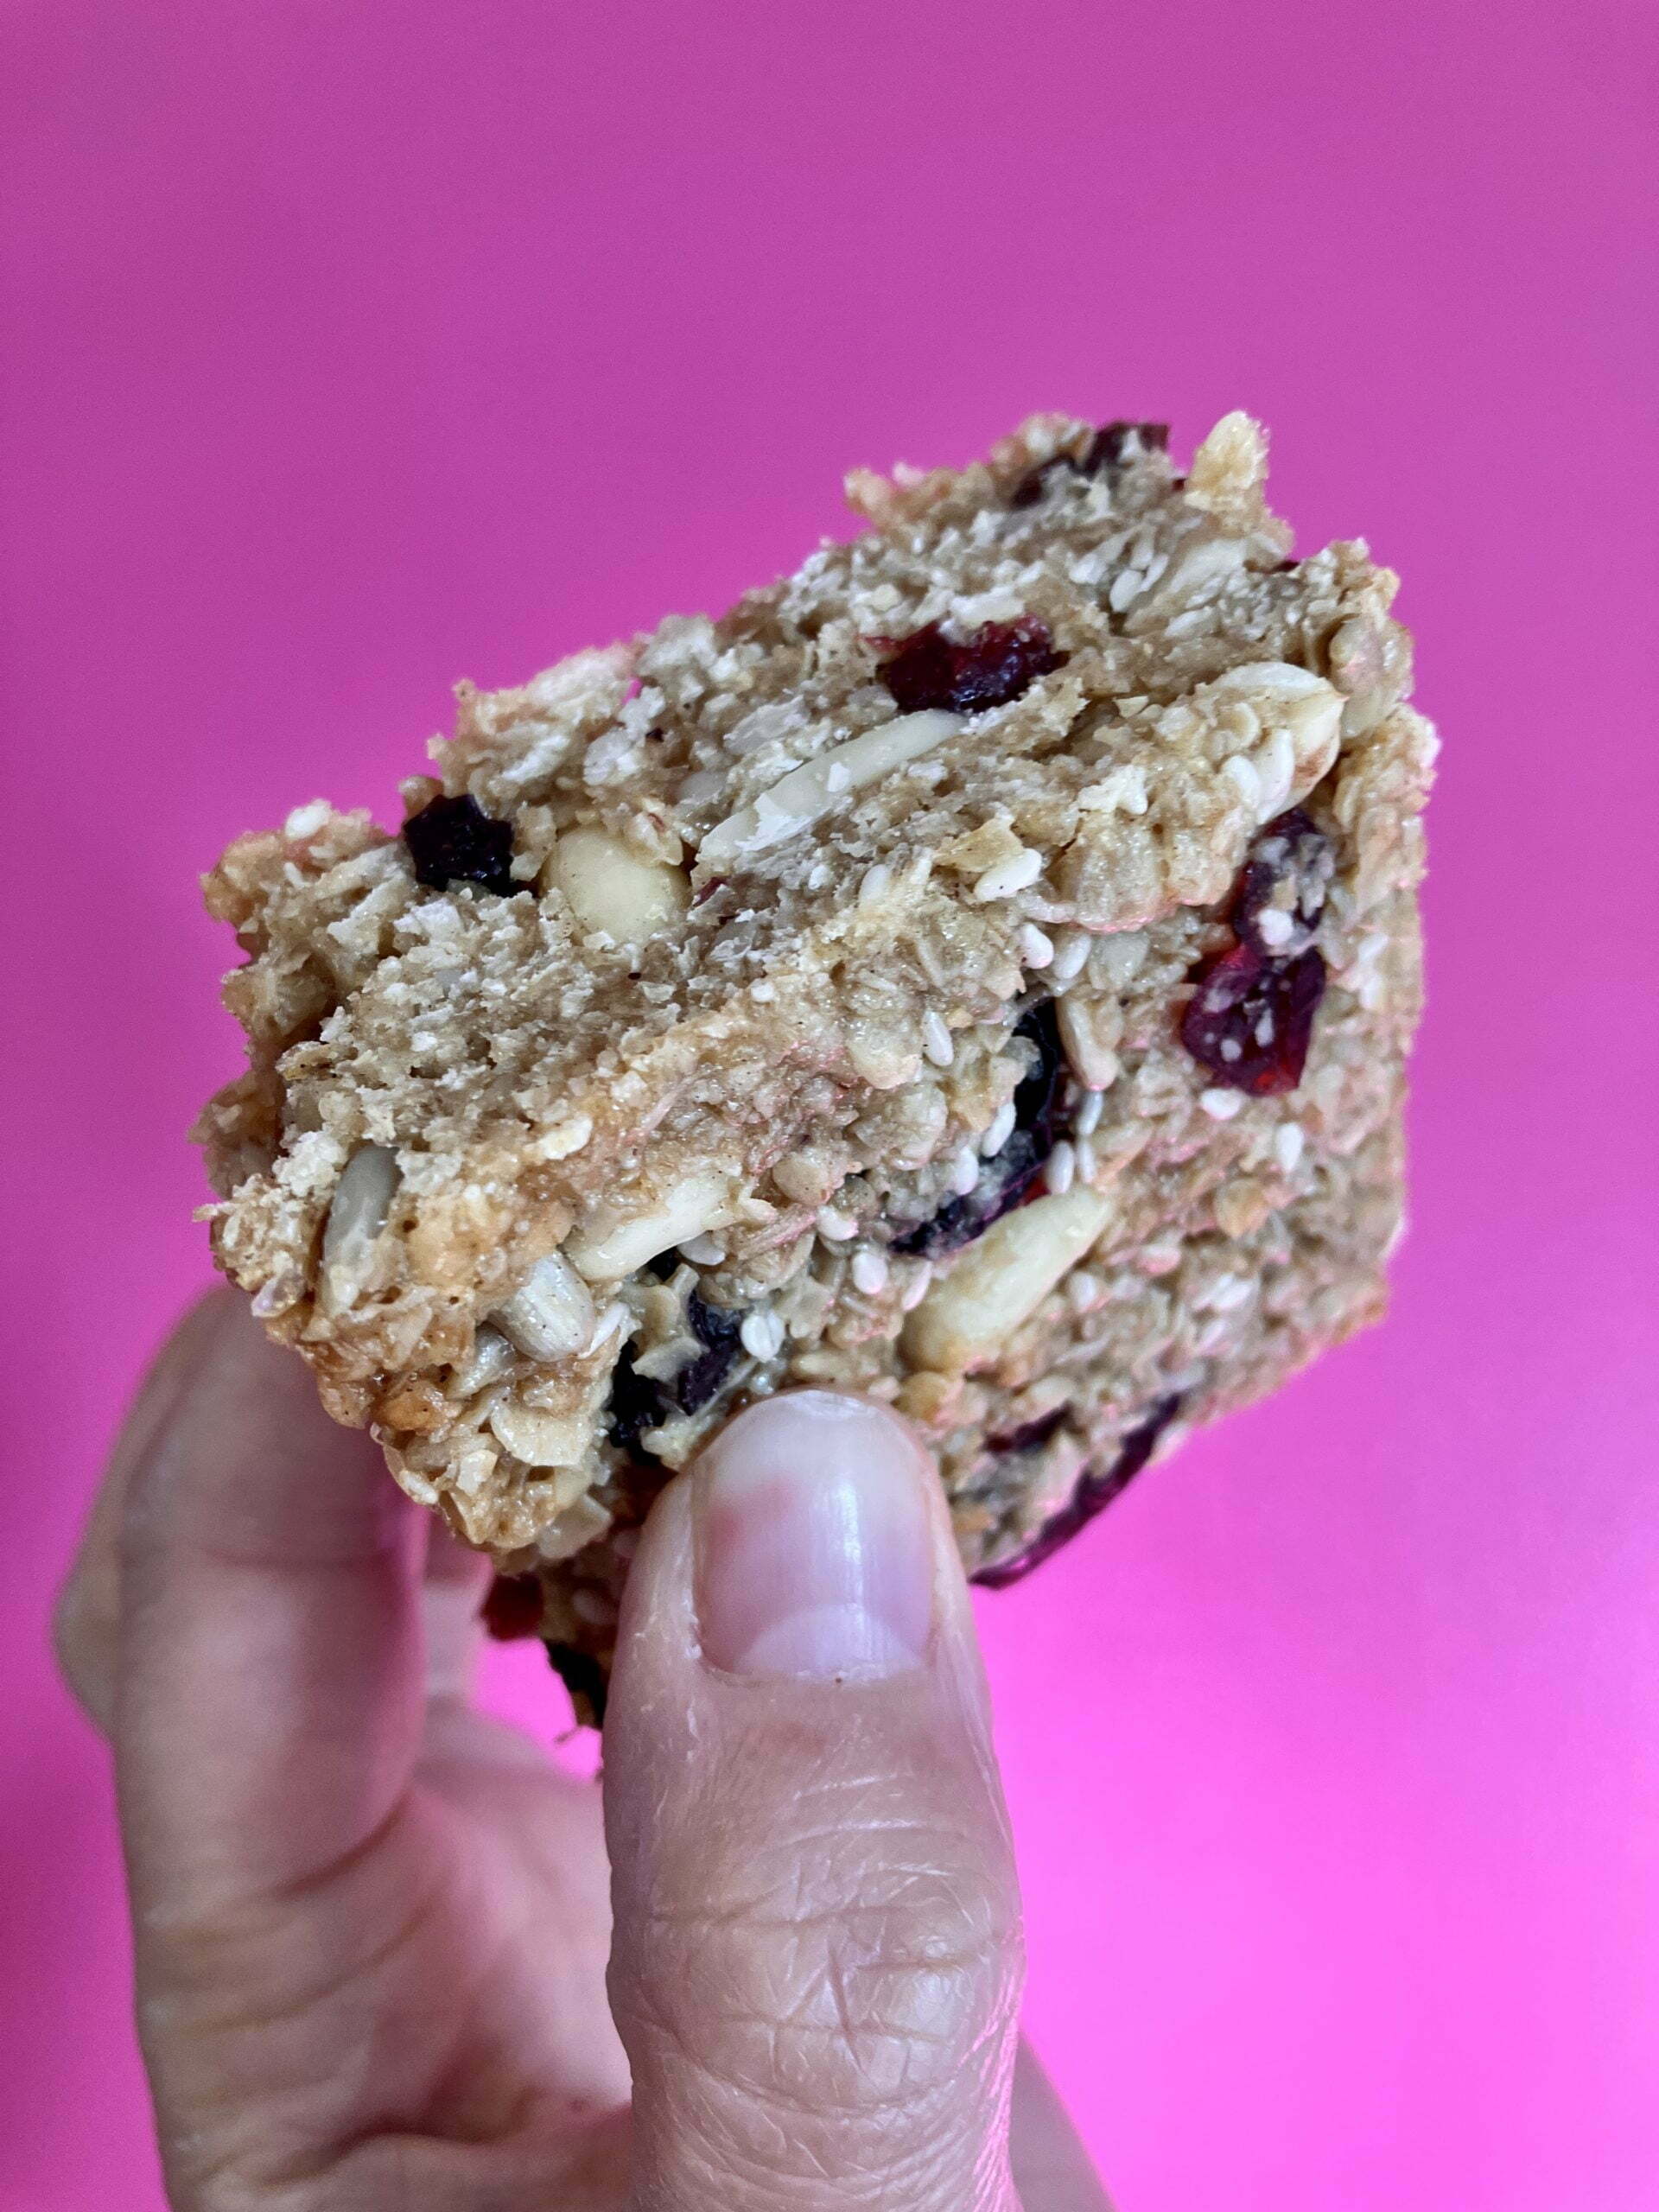 A granola bar is shown held up against a pink backdrop. The granola bar is part of our wholesale bakery offering.